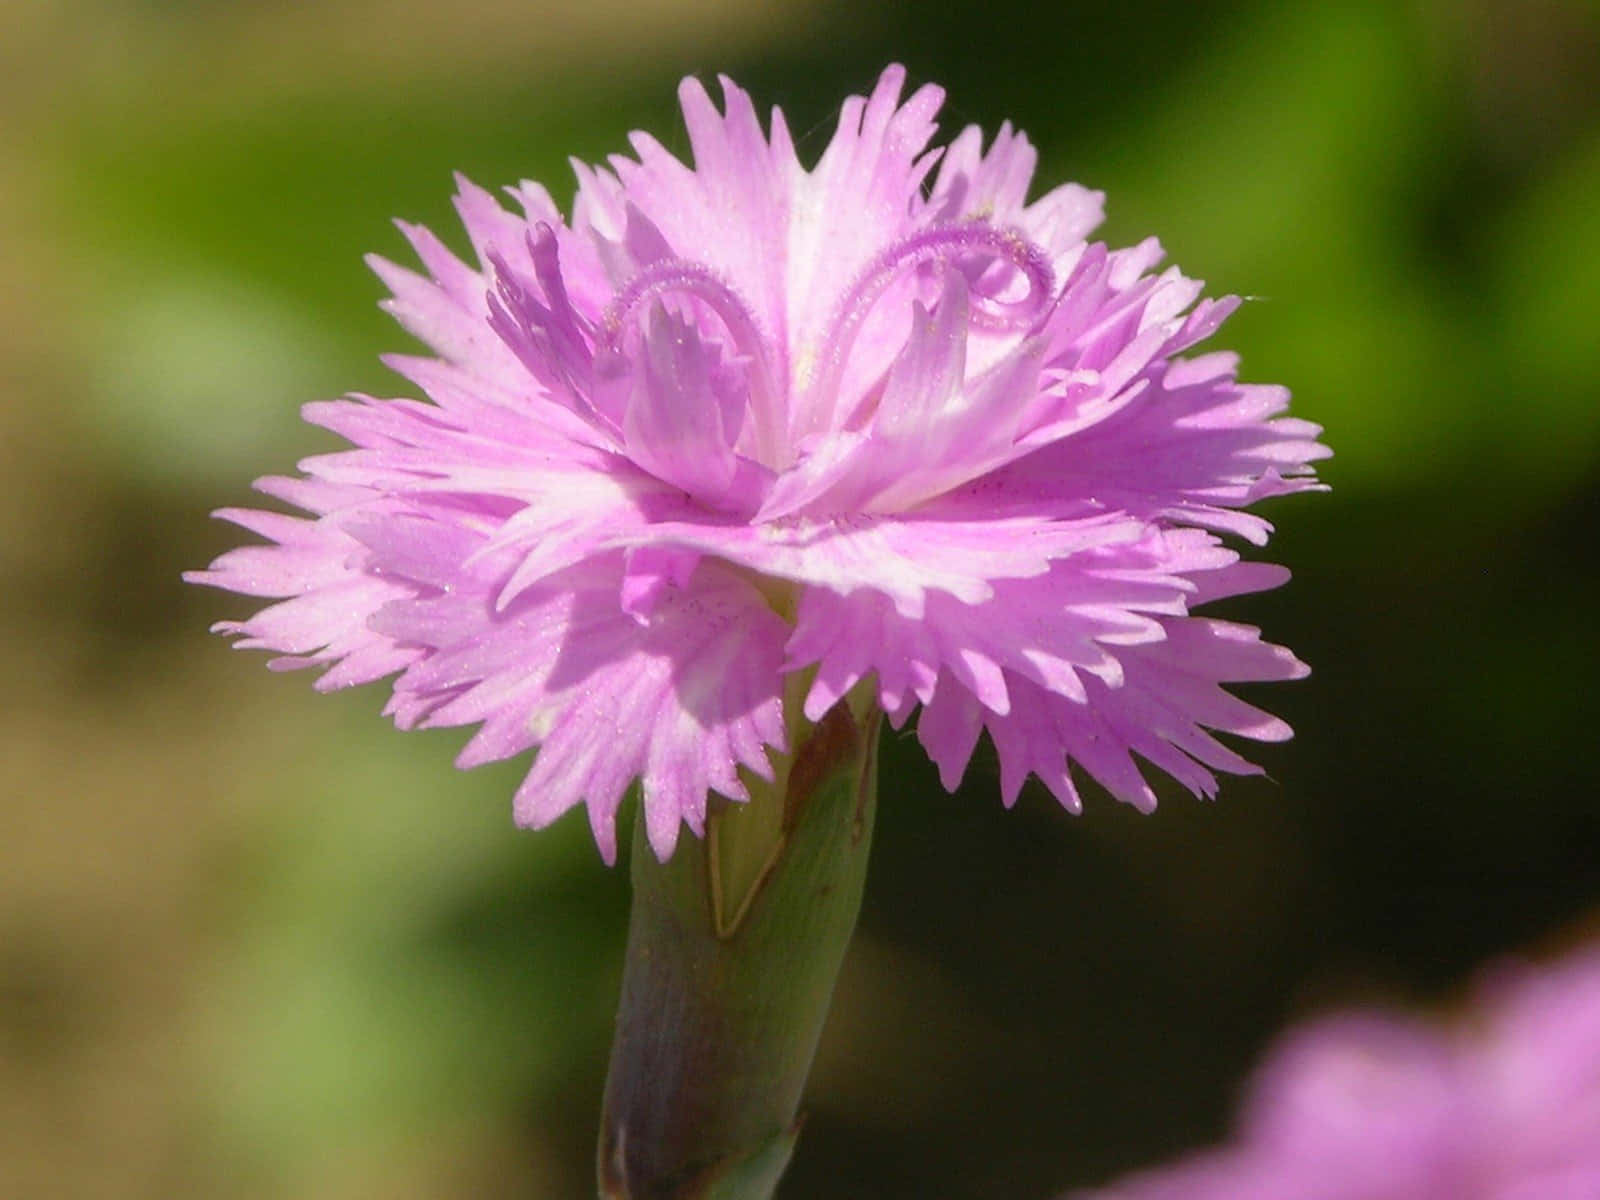 A Pink Flower With A Green Stem